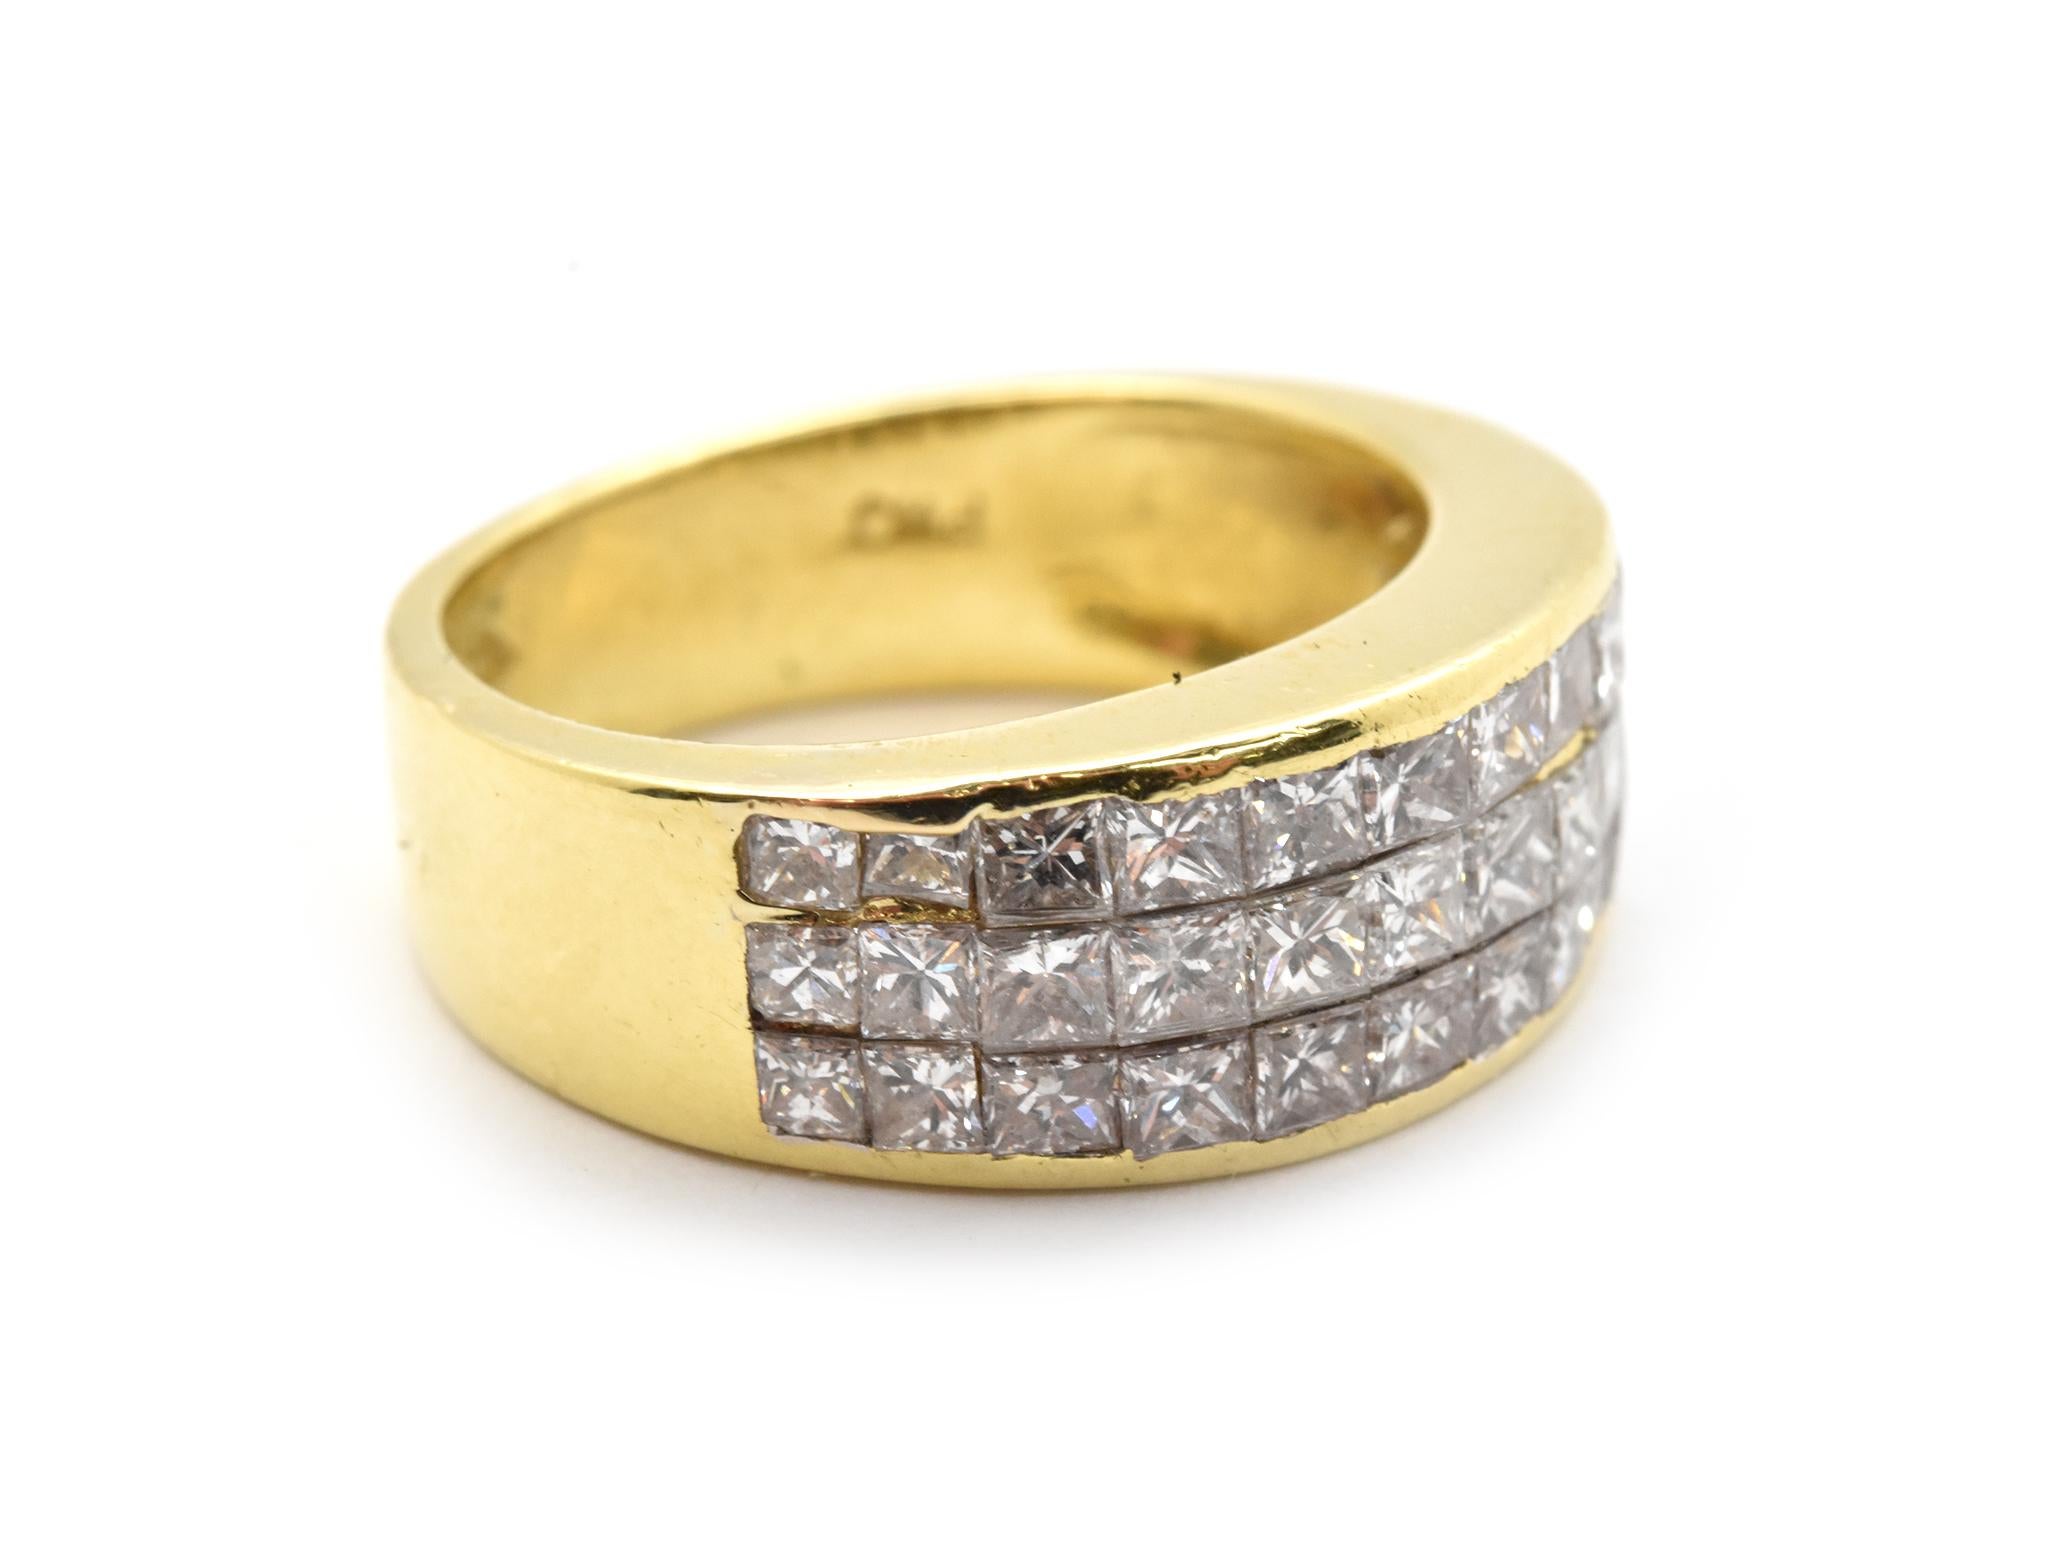 This fabulous band features invisible-set princess-cut diamonds in 18k yellow gold. The diamonds have a total weight of 2.00ct, and they are graded H-I in color and SI-I in clarity. The band measures 8mm wide, and it weighs 7.40 grams. The ring is